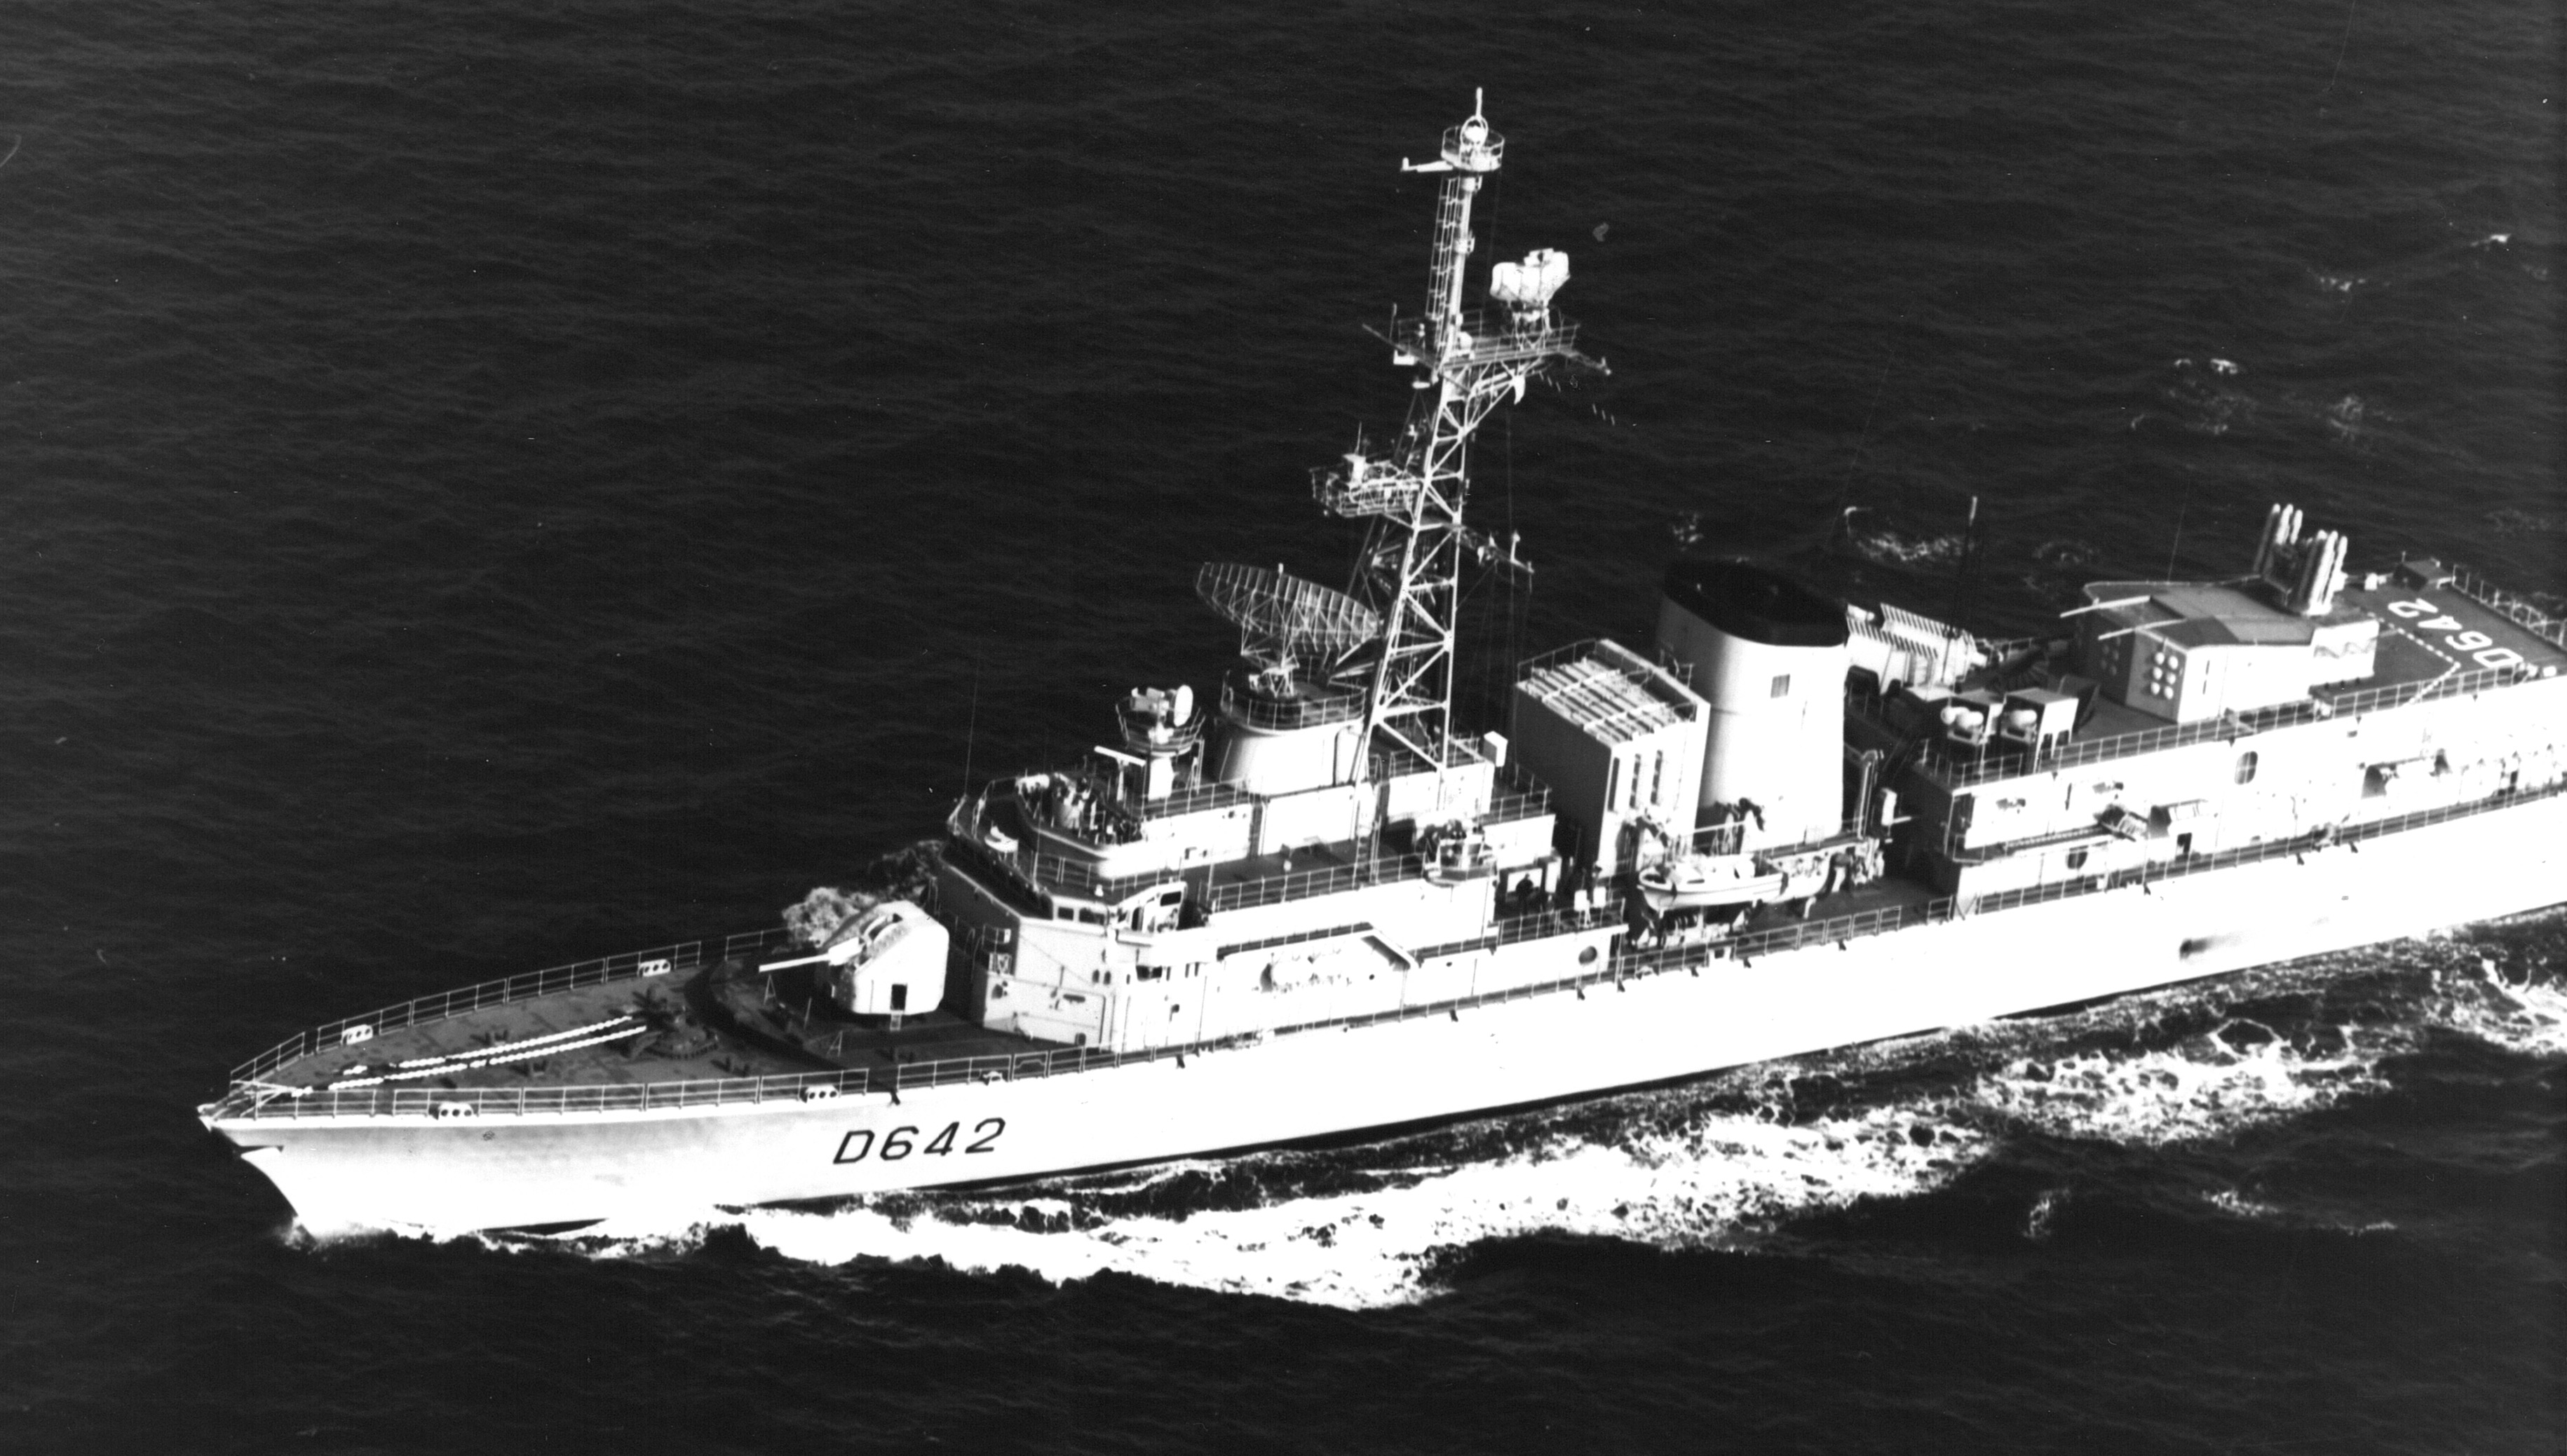 MONTCALM (D642) showing radars -DRBV 26 early waring & DRBC-51C air search :27Apr1983 :G. Jacobs Collection.jpeg